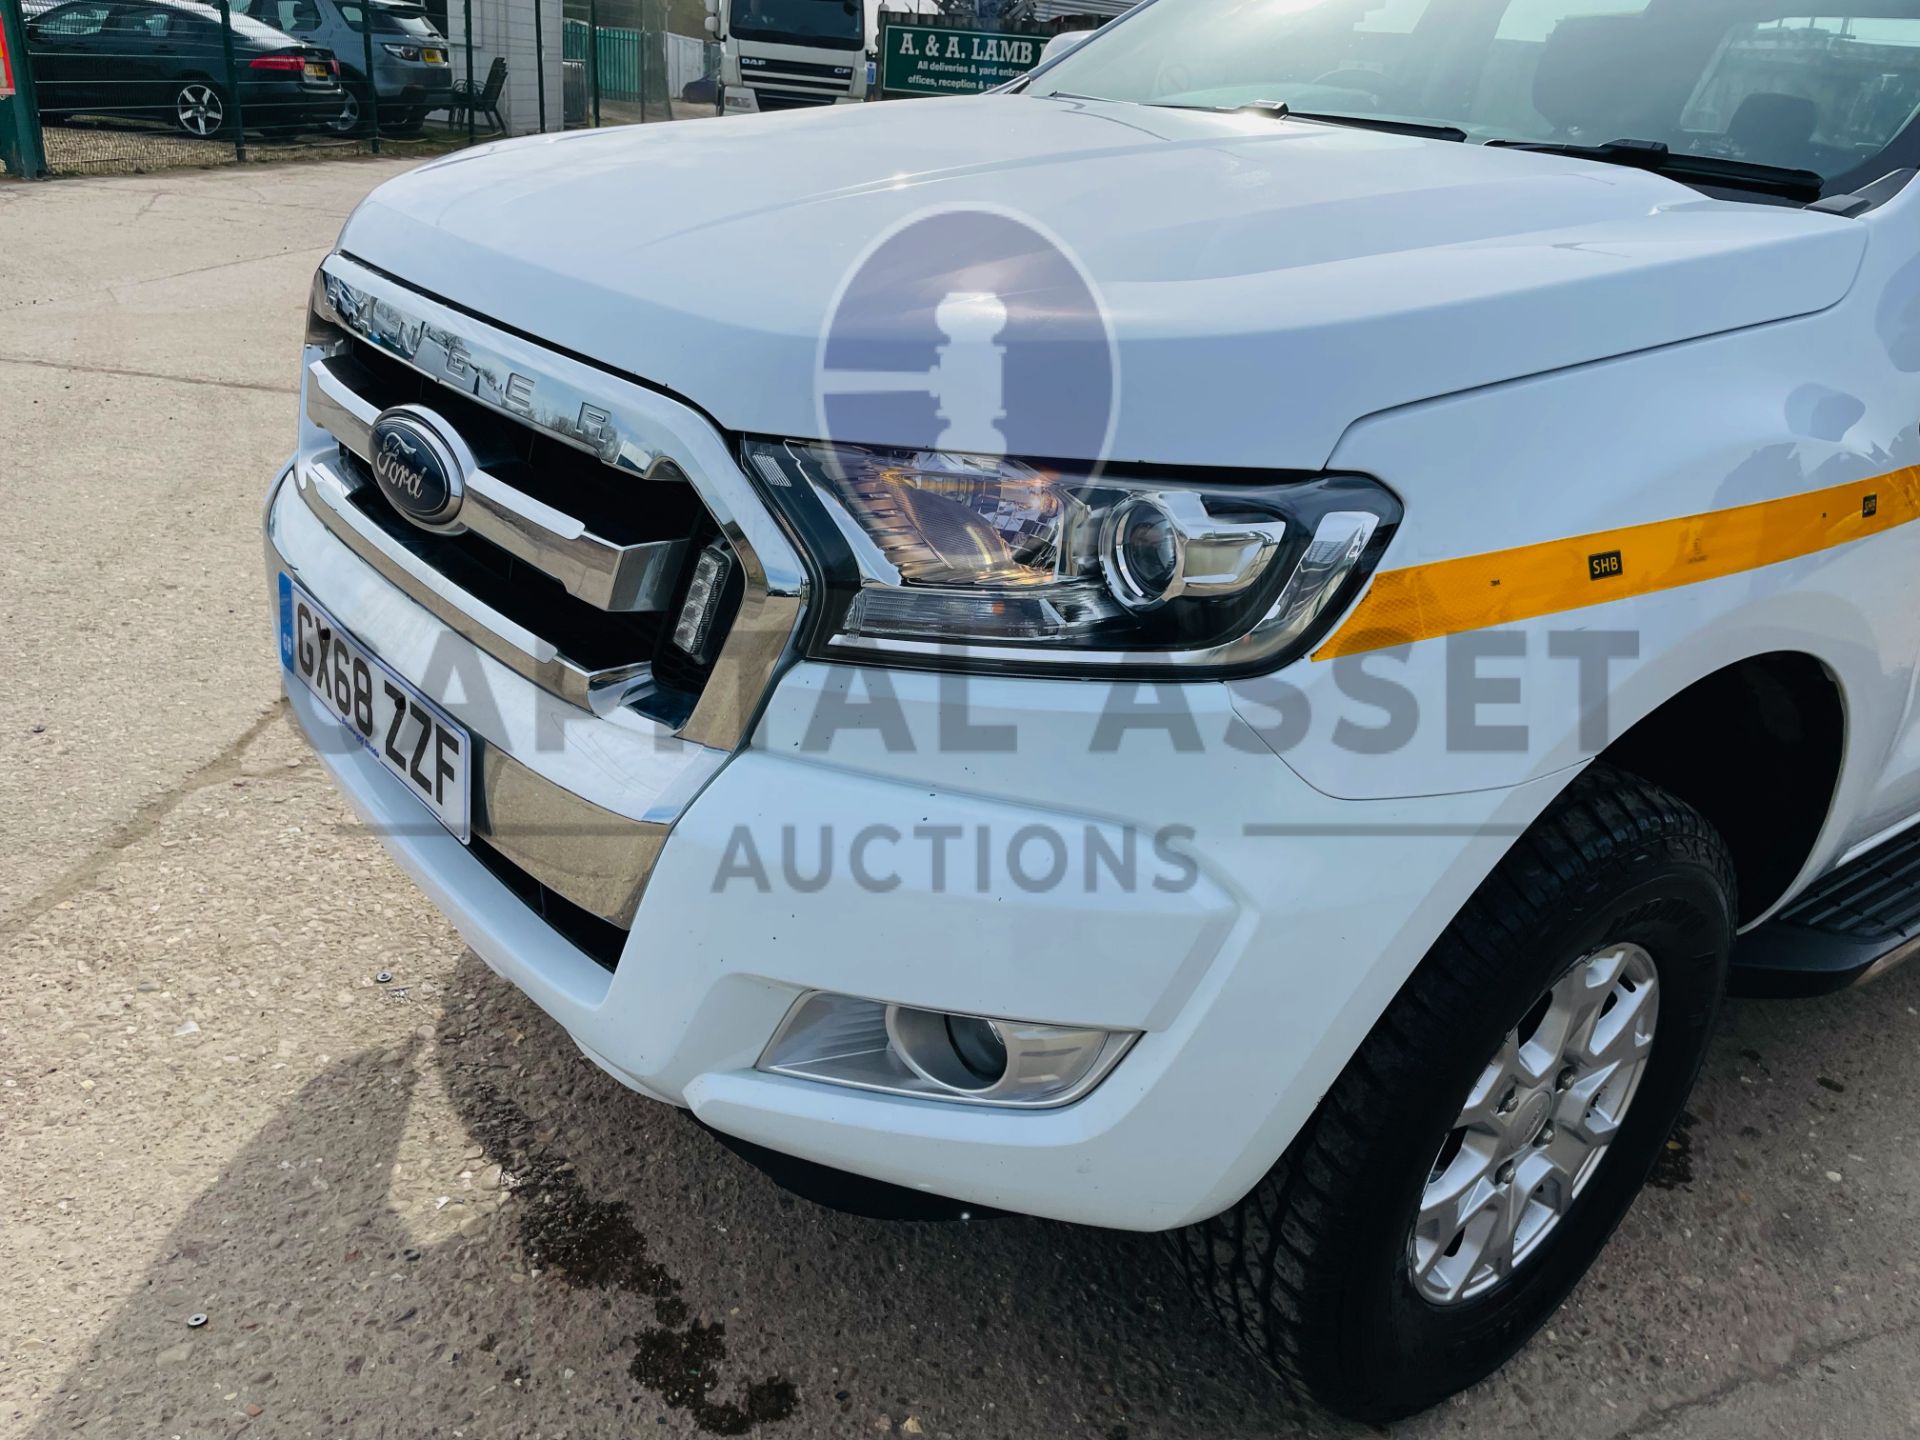 FORD RANGER *DOUBLE CAB PICK-UP* (2019 - EURO 6) 2.2 TDCI - 160 BHP (1 OWNER) *U-LEZ COMPLIANT* - Image 15 of 47